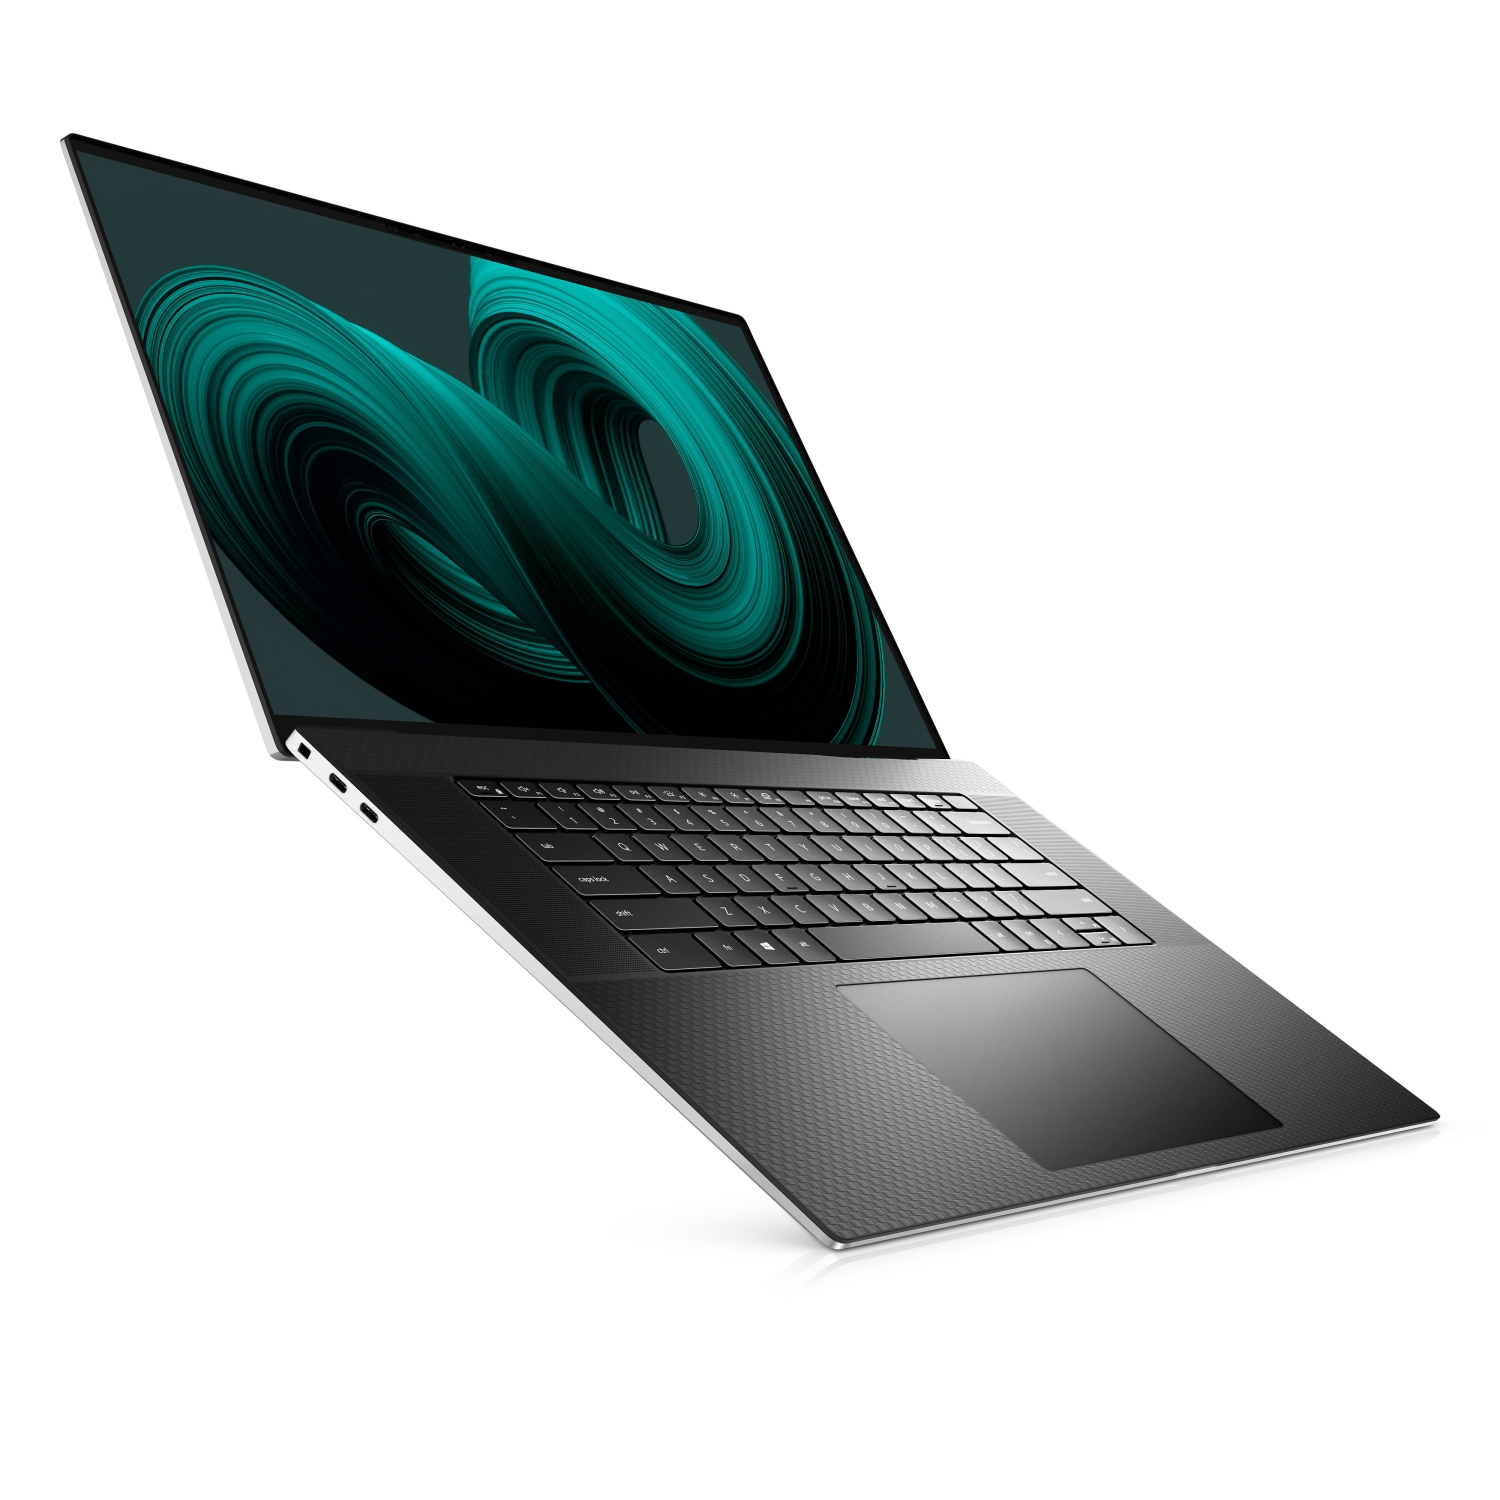 Refurbished (Excellent) - Dell XPS 17 9710 Laptop (2021) | 17" 4K Touch | Core i7 - 4TB SSD - 64GB RAM - RTX 3060 | 8 Cores @ 4.6 GHz - 11th Gen CPU Certified Refurbished